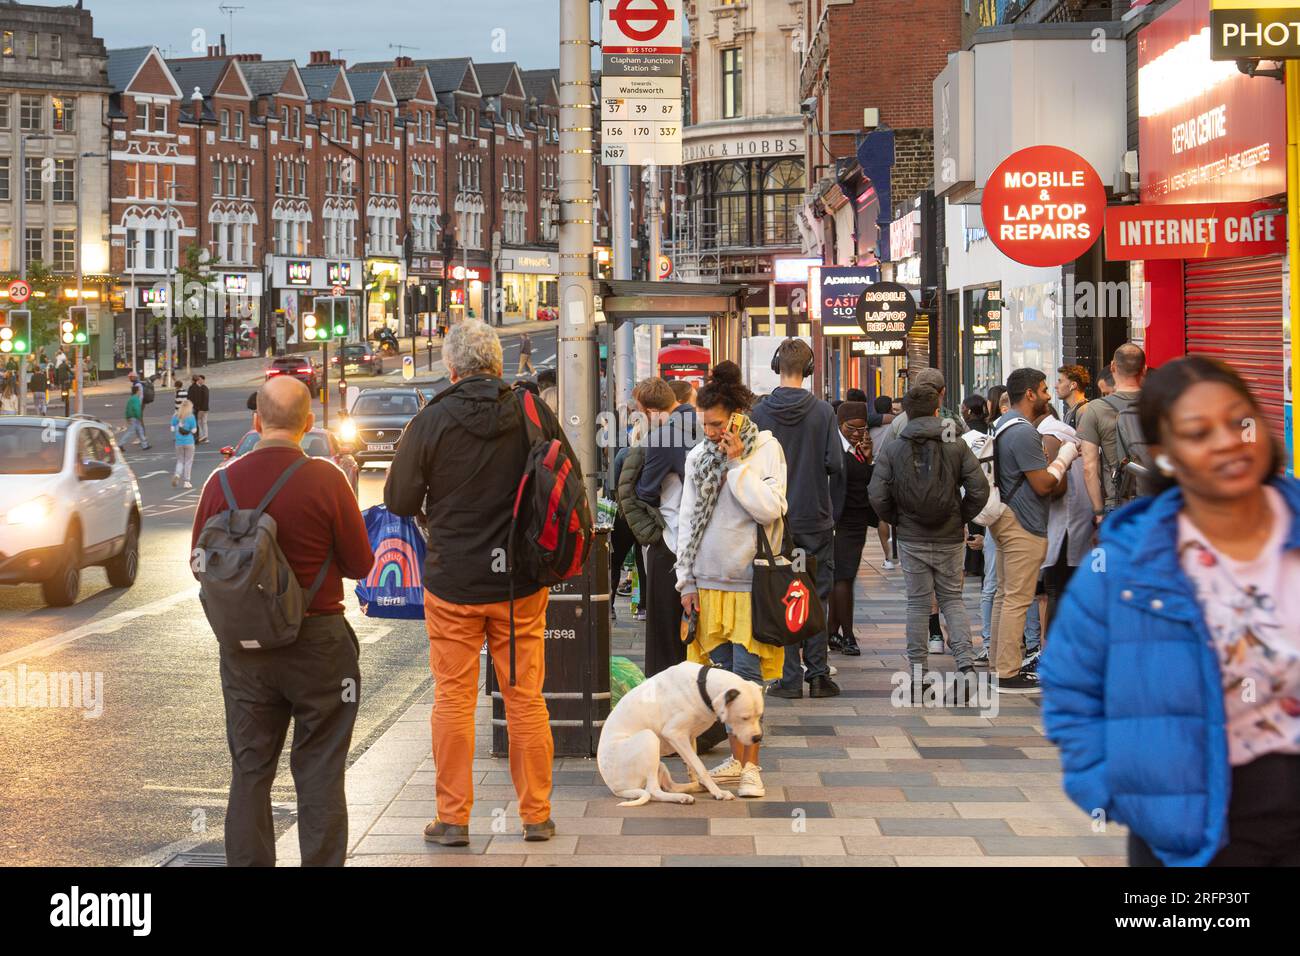 Clapham Junction is an urban locality around Clapham Junction railway station in London, England Stock Photo